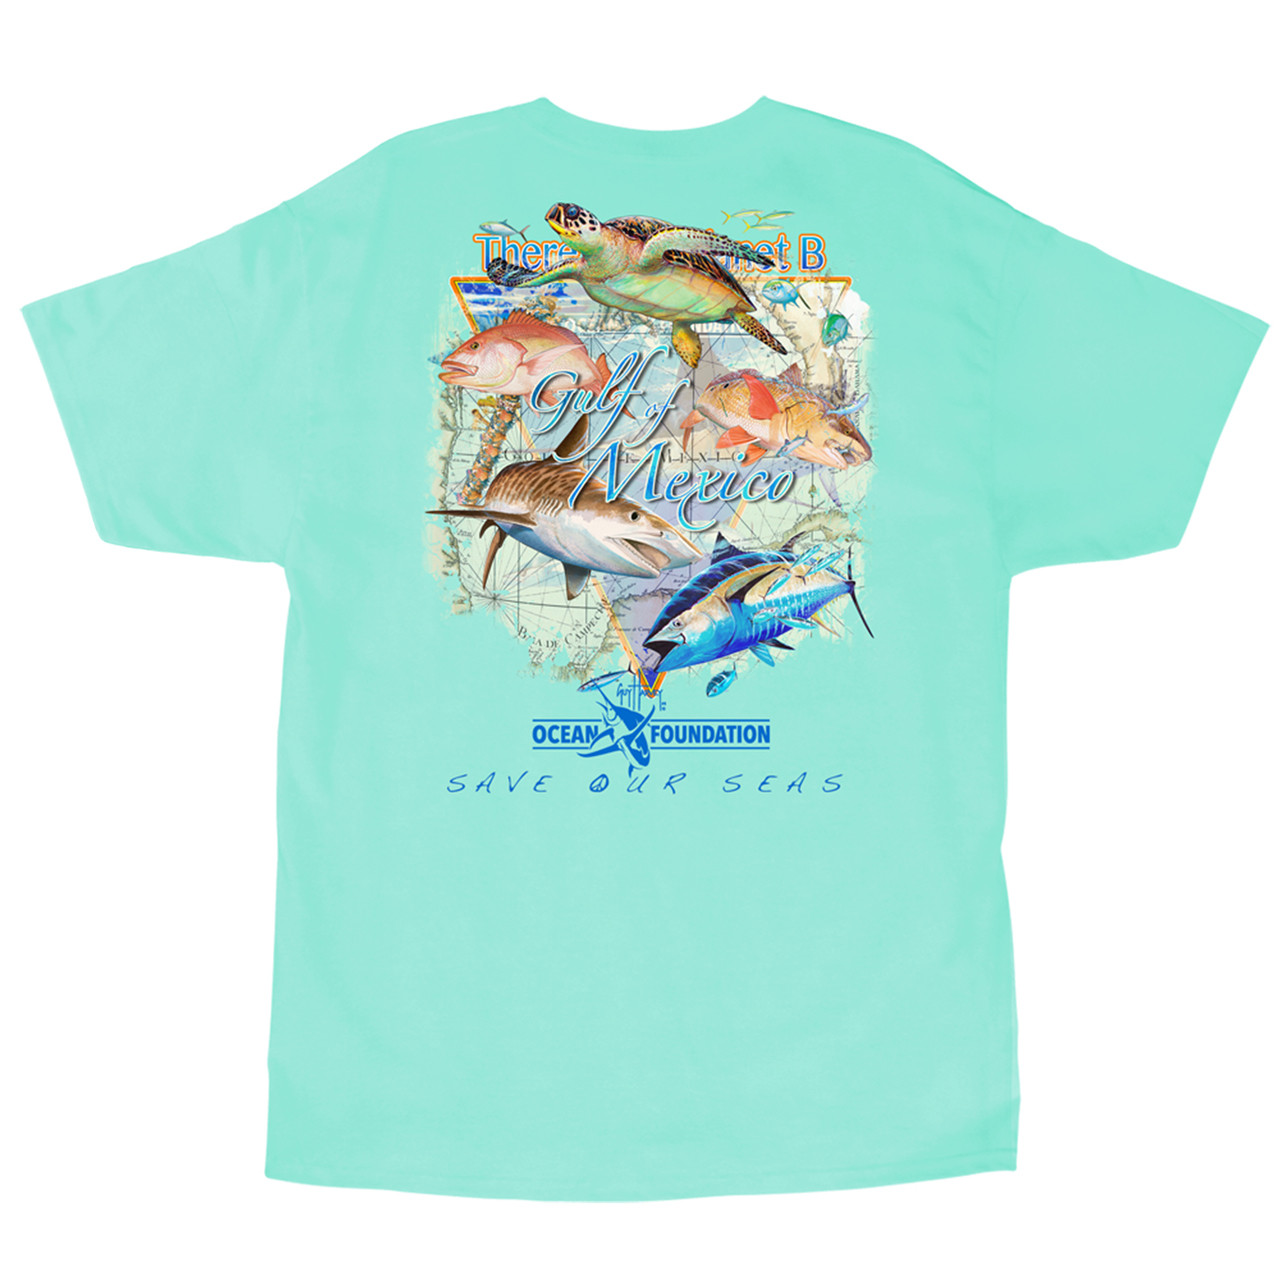 Guy Harvey Colorful T-Shirts for Men